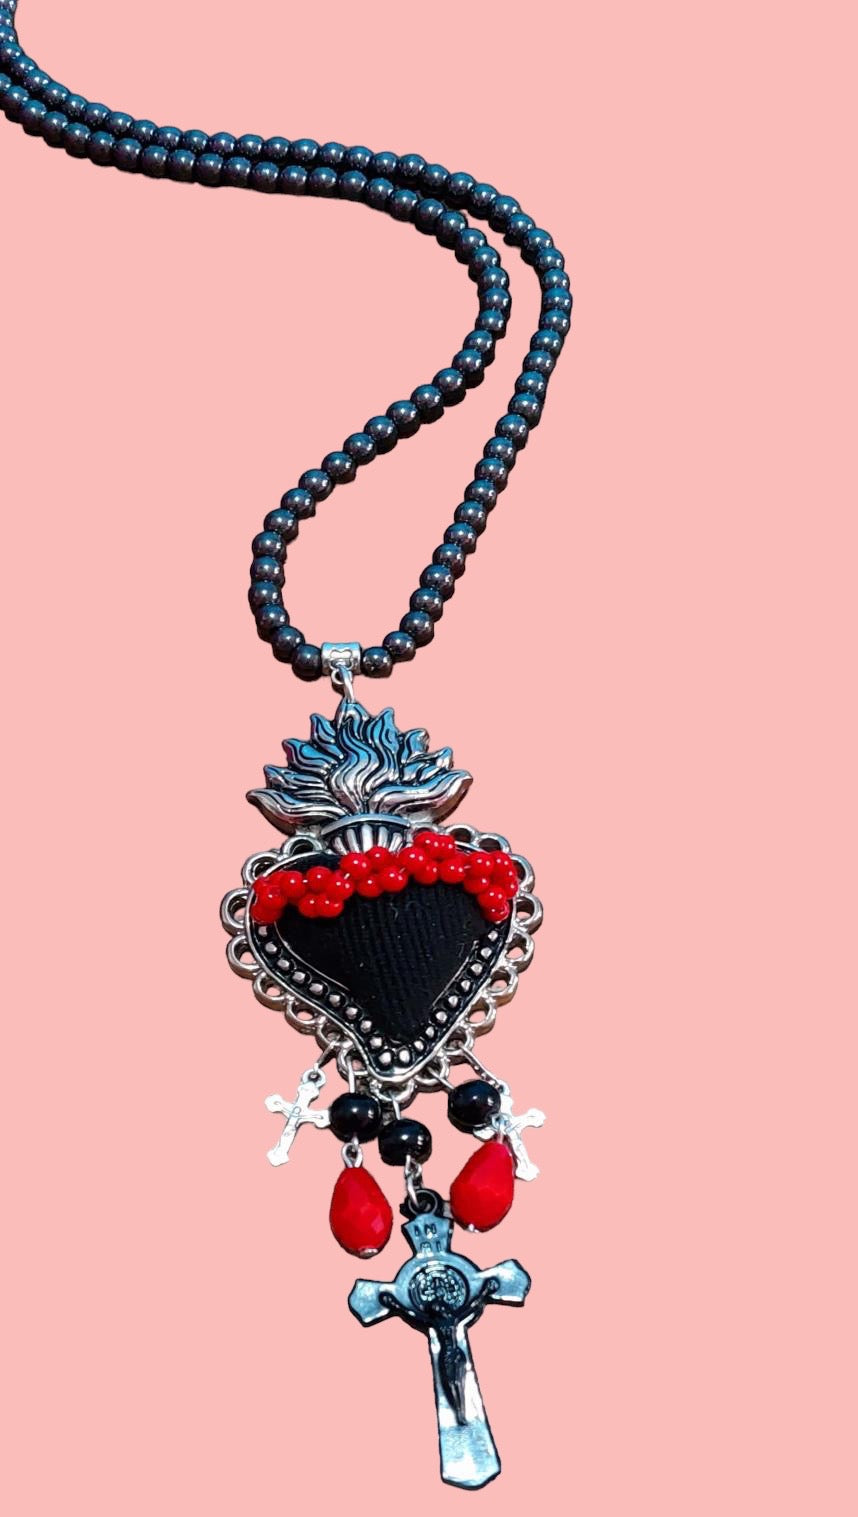 Black and red multicultural fashion necklace